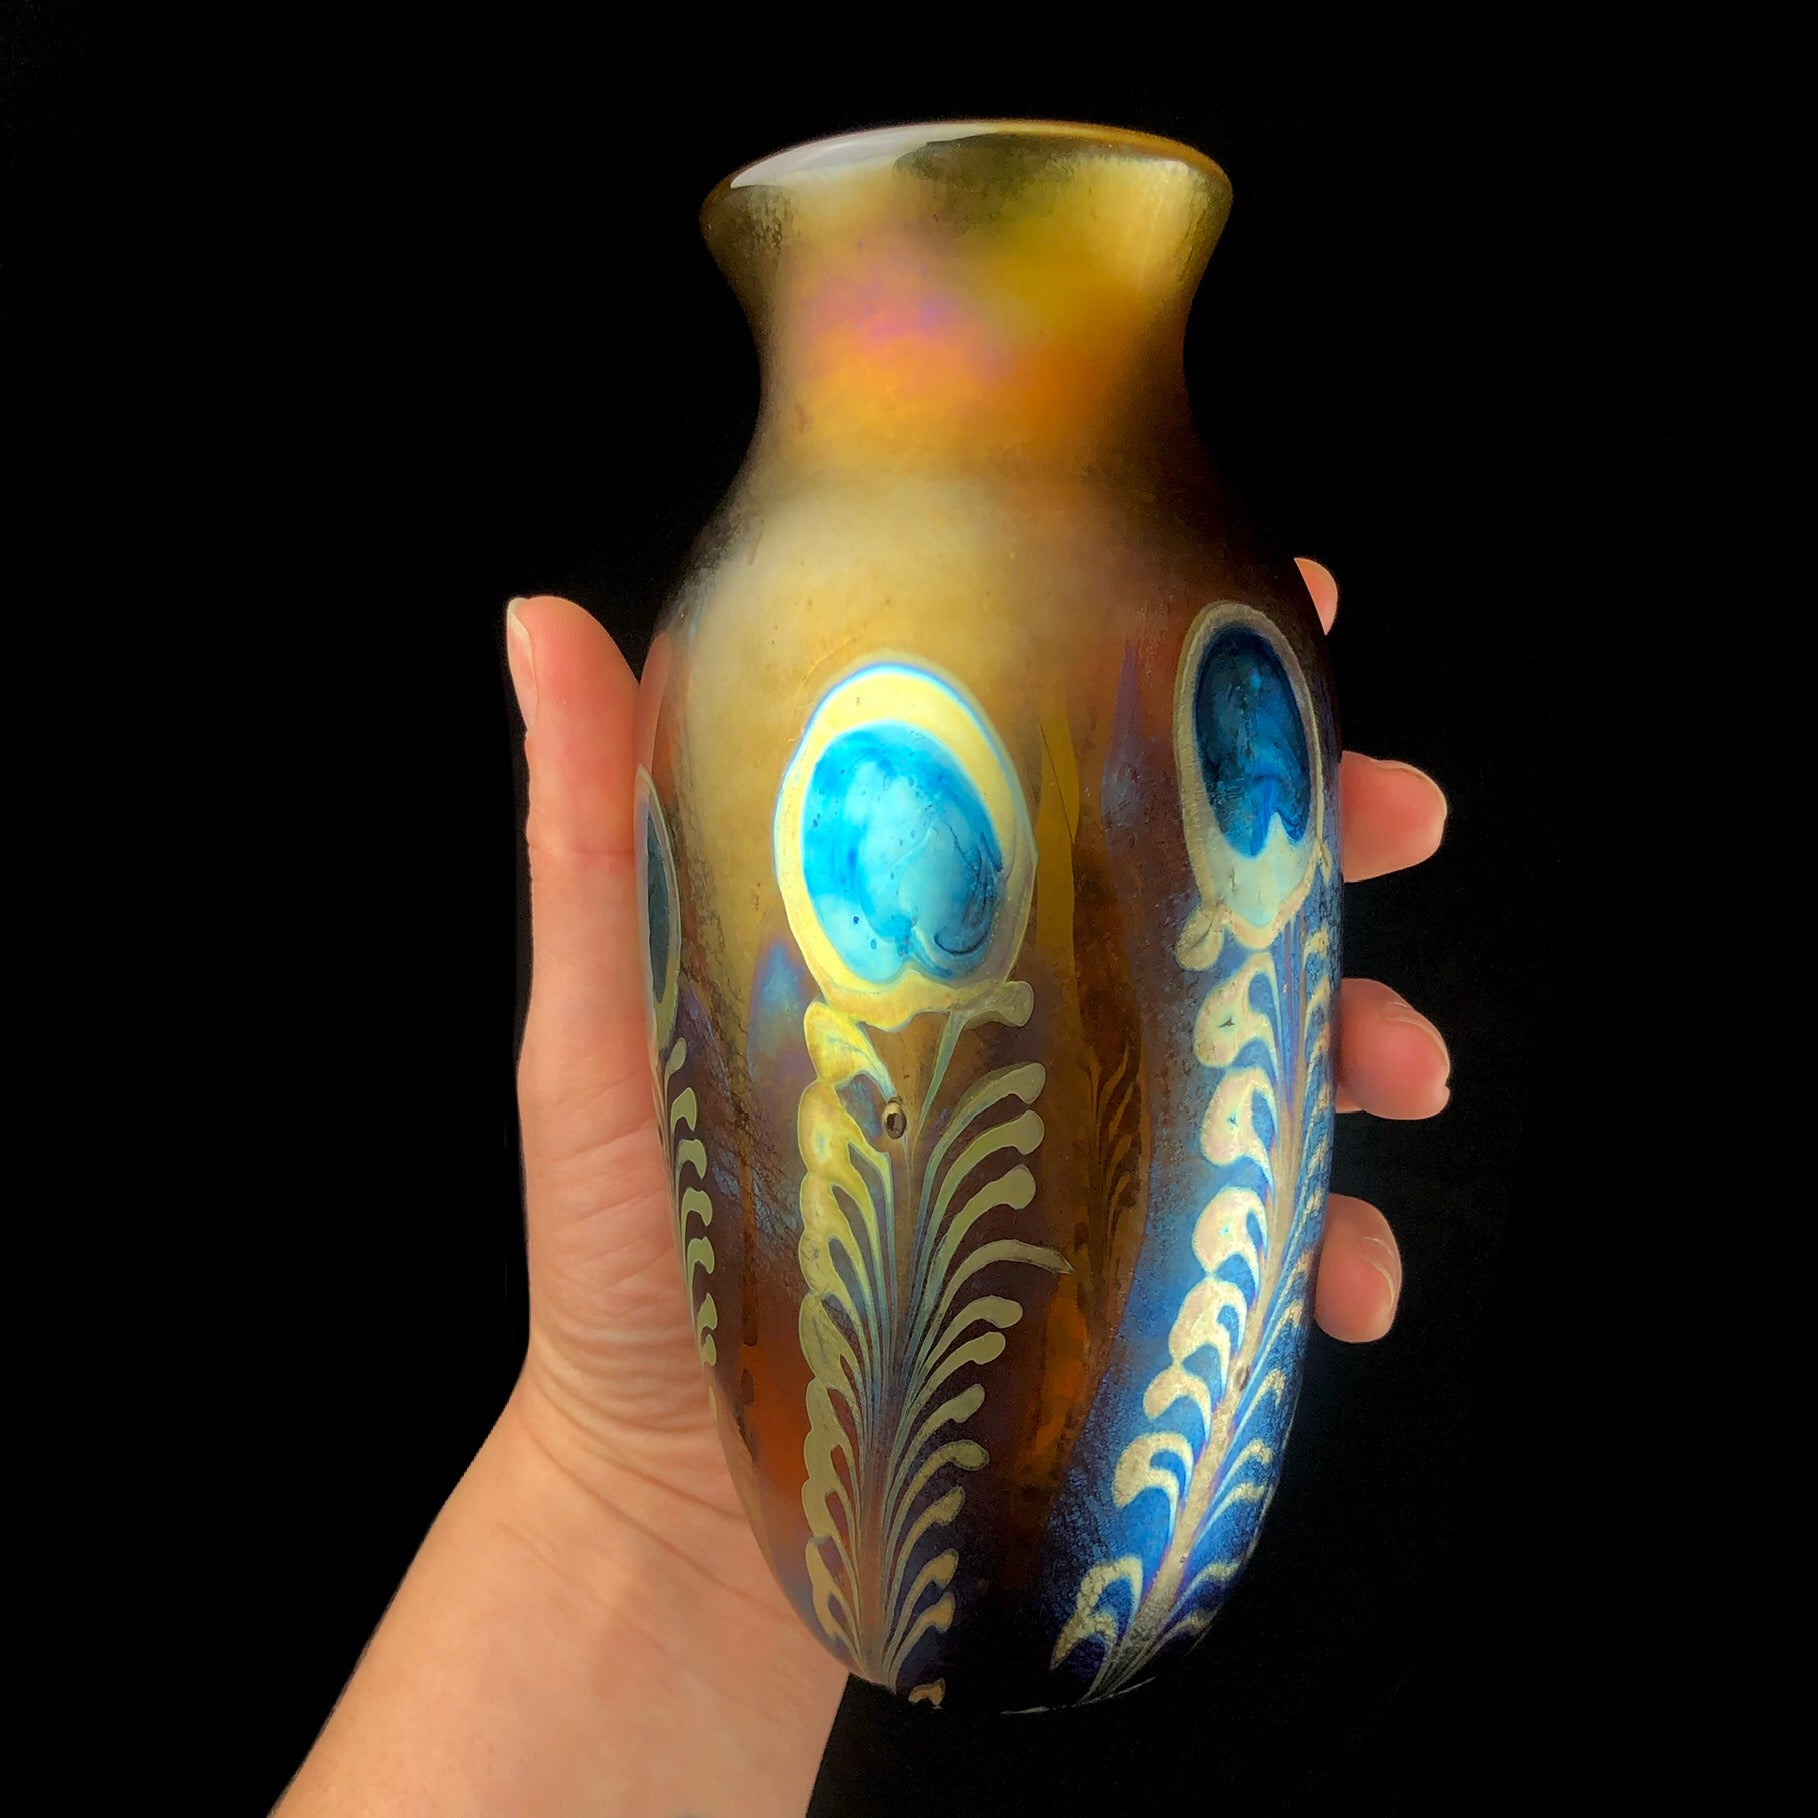 Amber Peacock Vase shown in hand